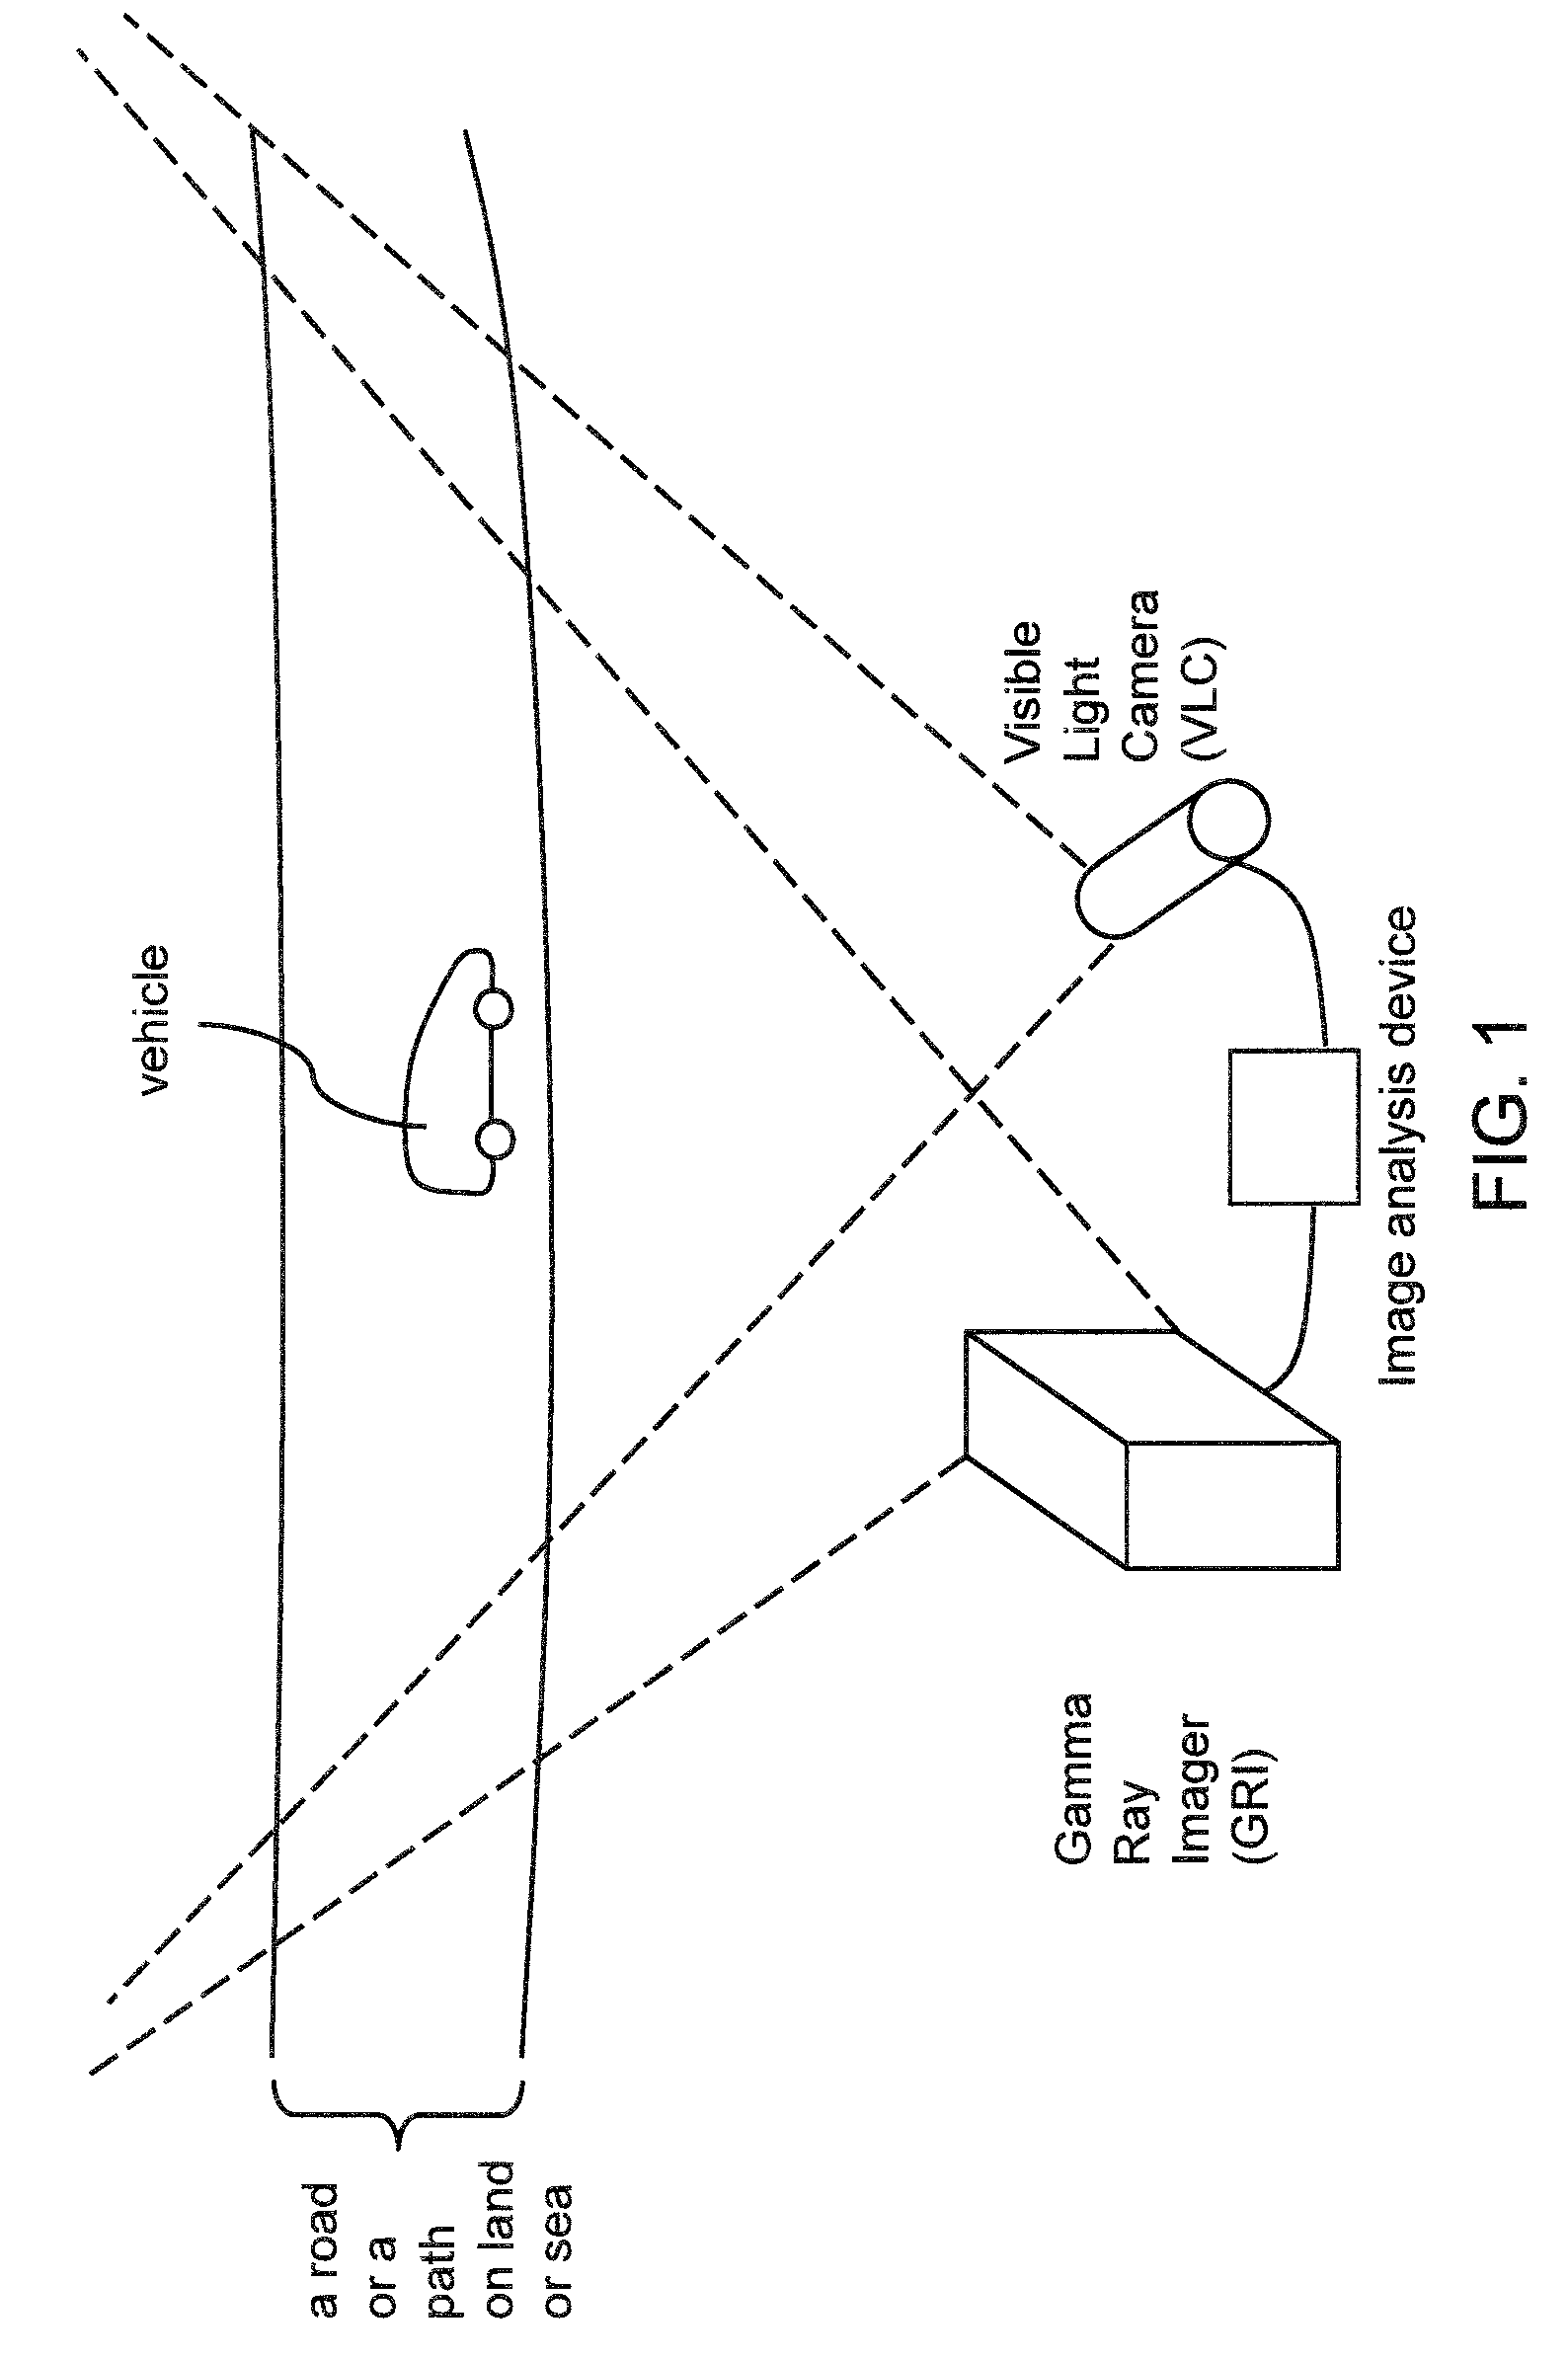 Calibration method for video and radiation imagers